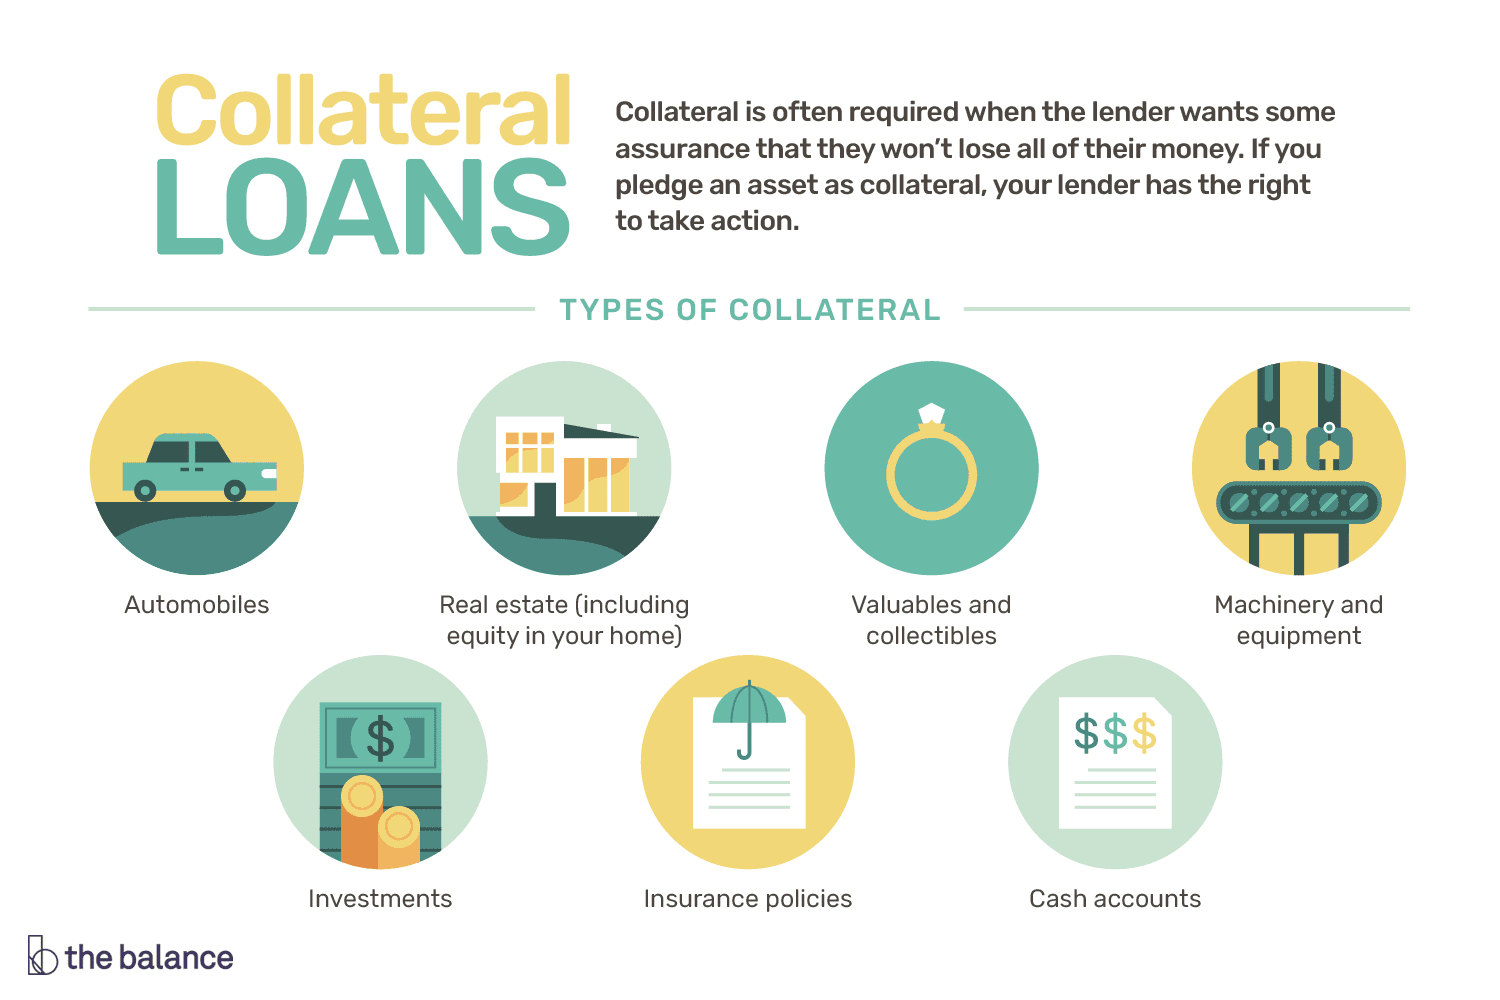 Collateral Loan Agreement Template Using Collateral Loans To Borrow Against Your Assets